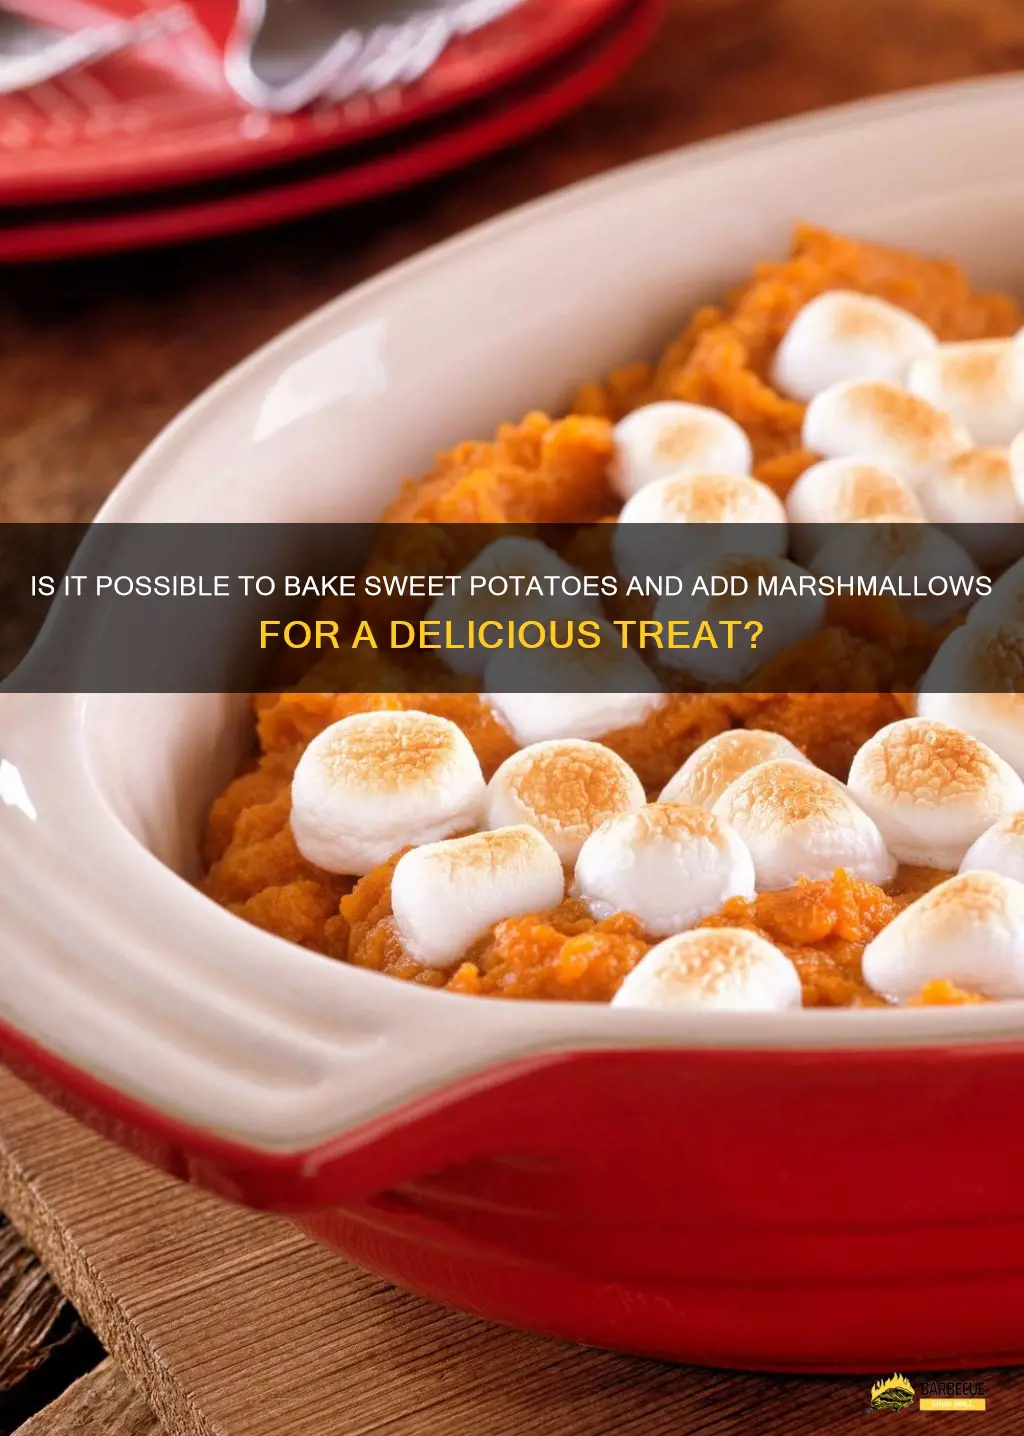 Is It Possible To Bake Sweet Potatoes And Add Marshmallows For A ...